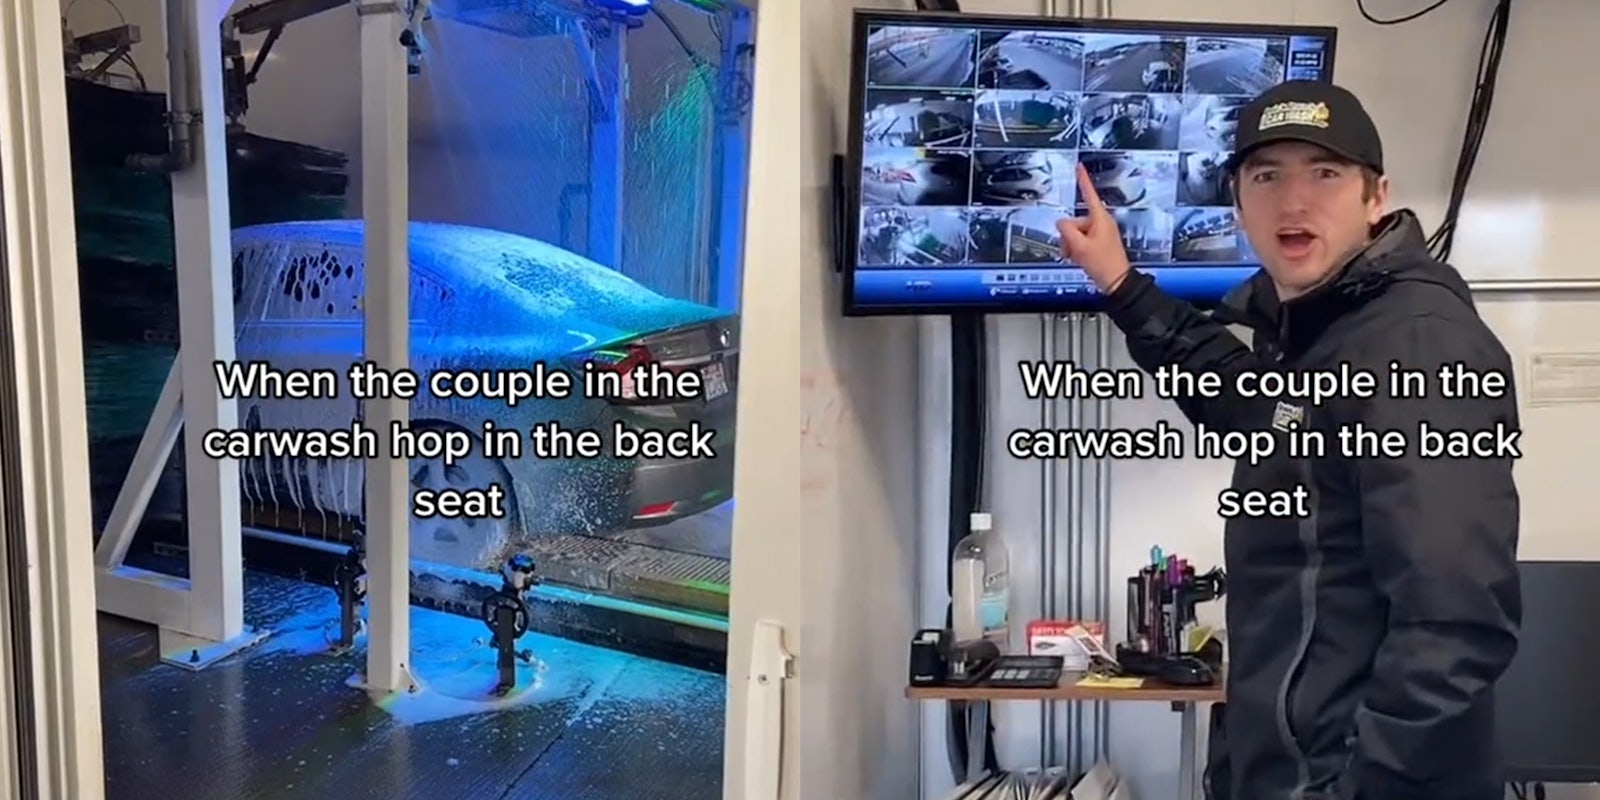 car entering car wash (l) employee pointing at screen (r) both with caption 'when the couple in the carwash hop in the back seat'